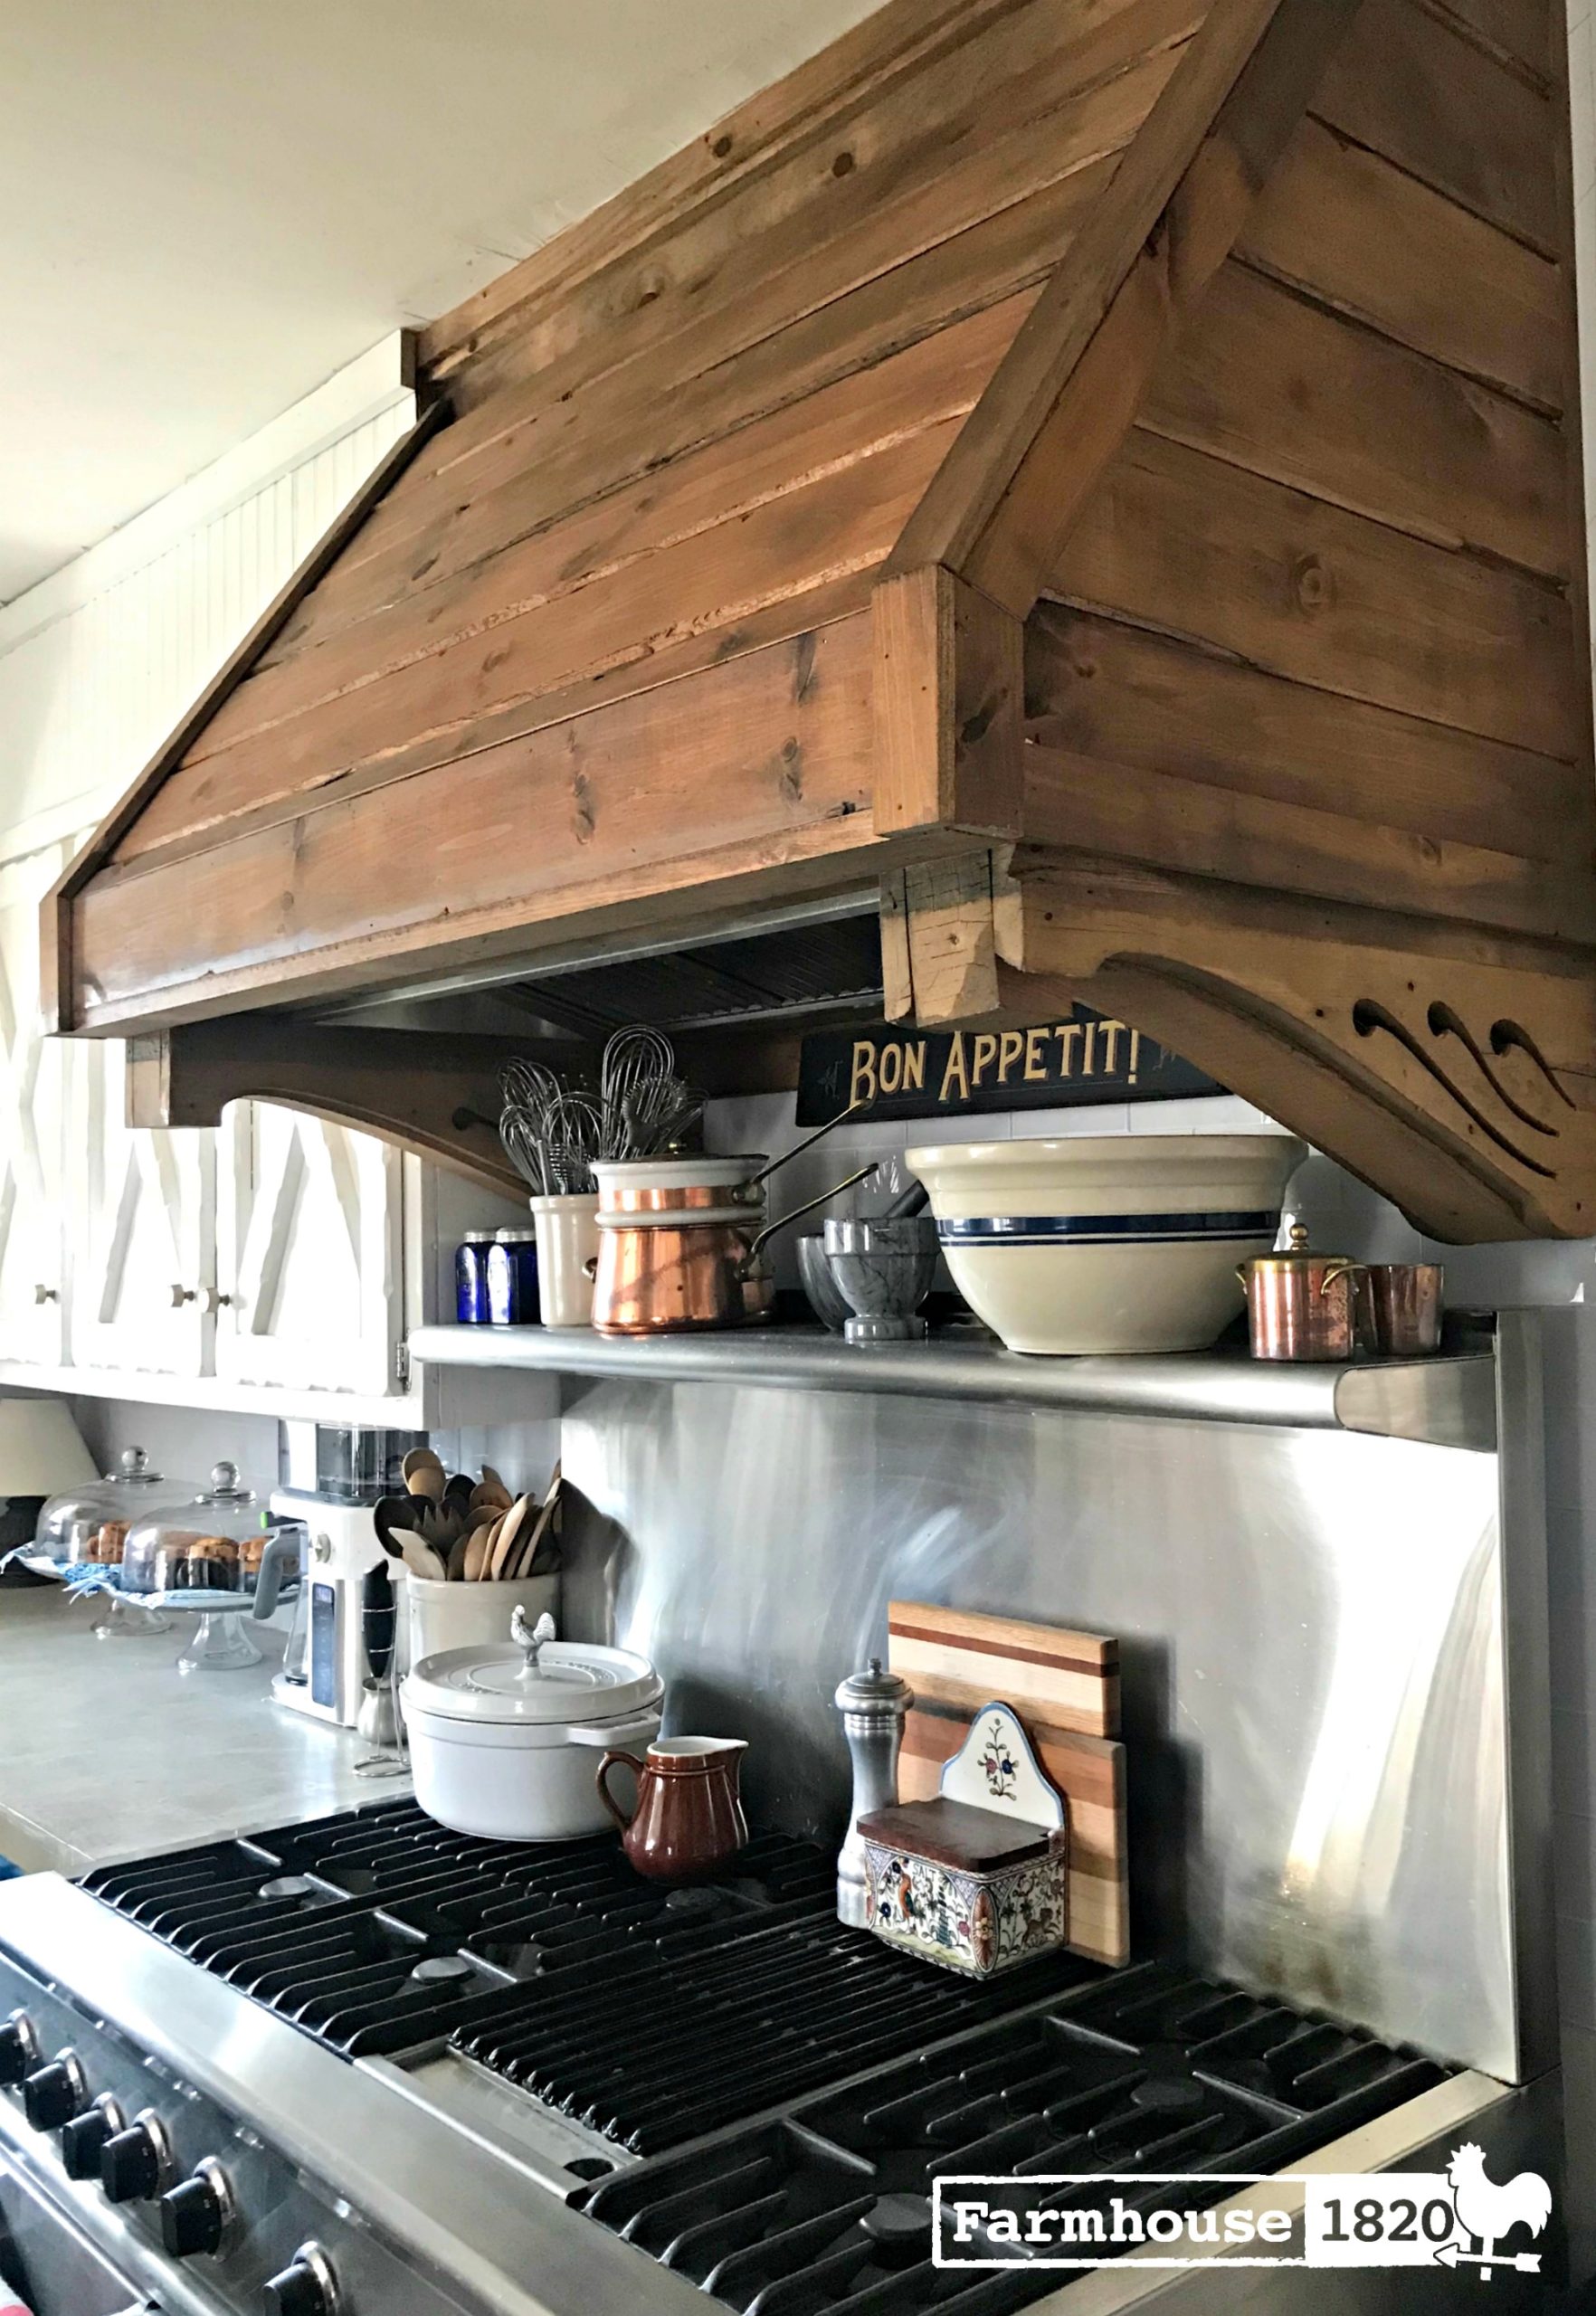 hood - it's all in the details with a custom range hood